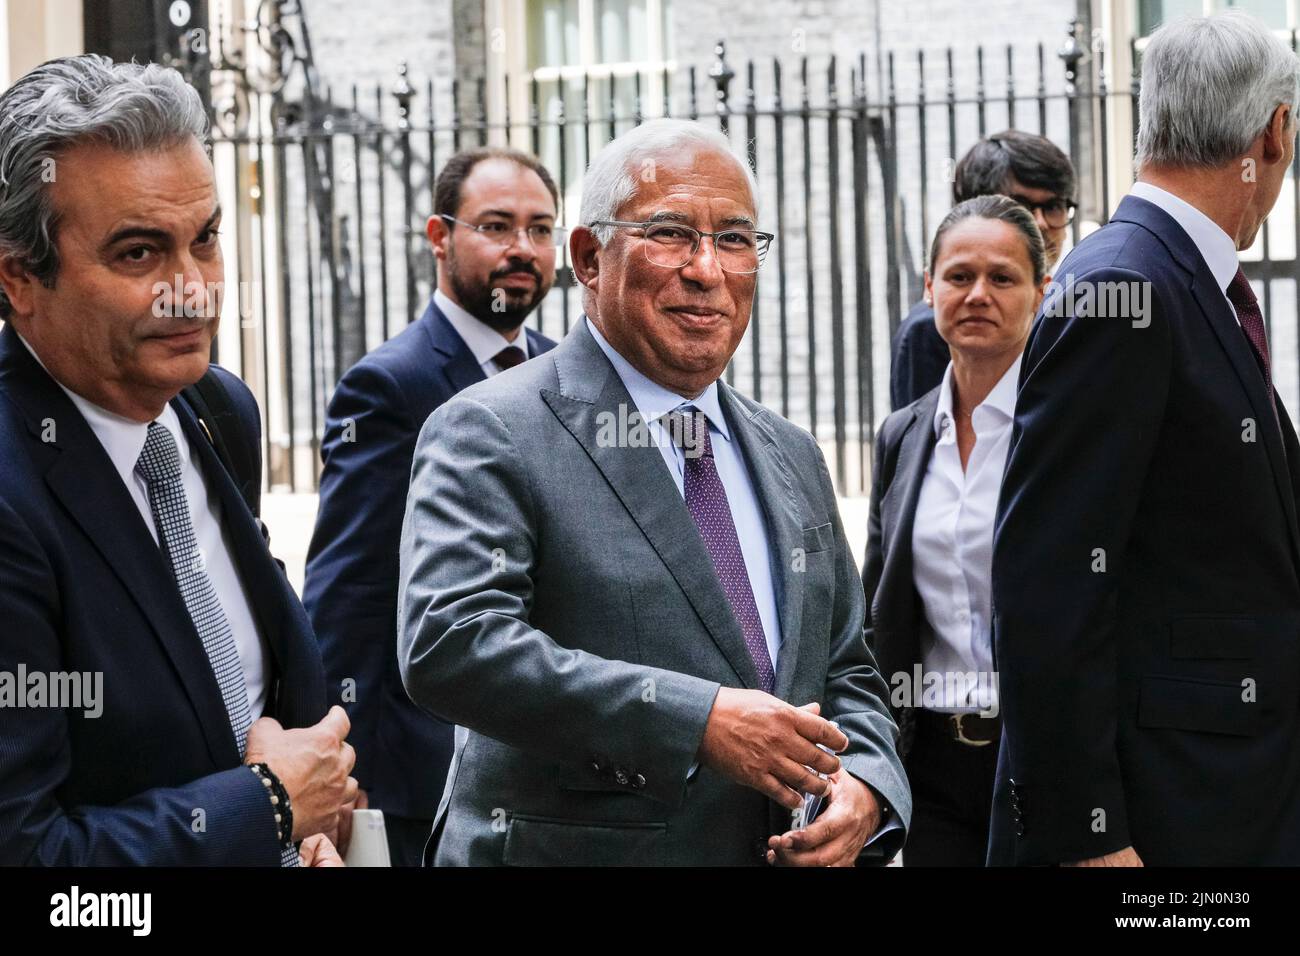 António Costa, Prime Minister of Portugal, official visit to London, smiles at camera Stock Photo